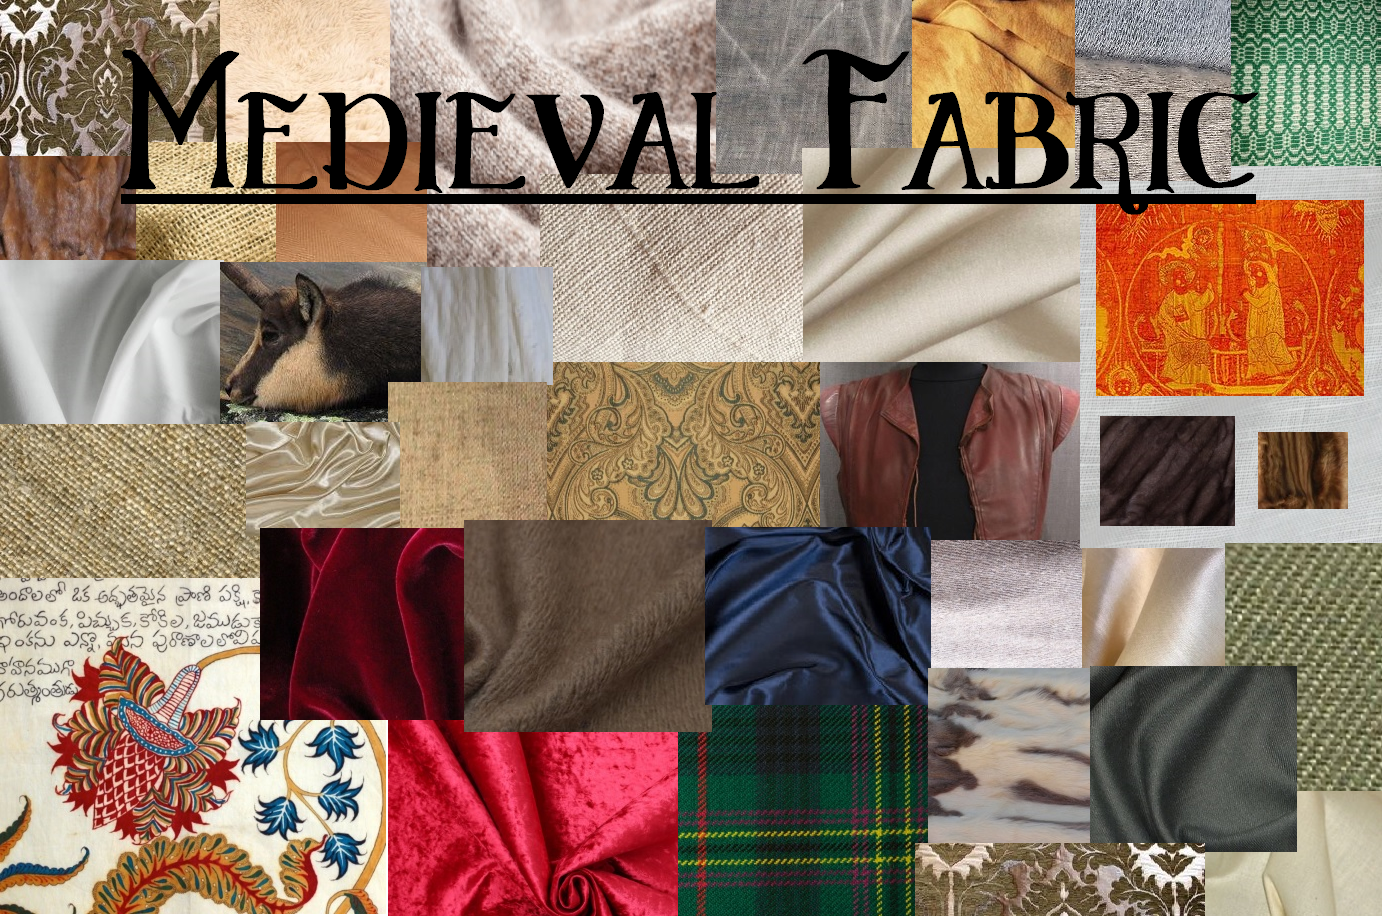 List of Medieval Textiles, Furs & Leather Fabric